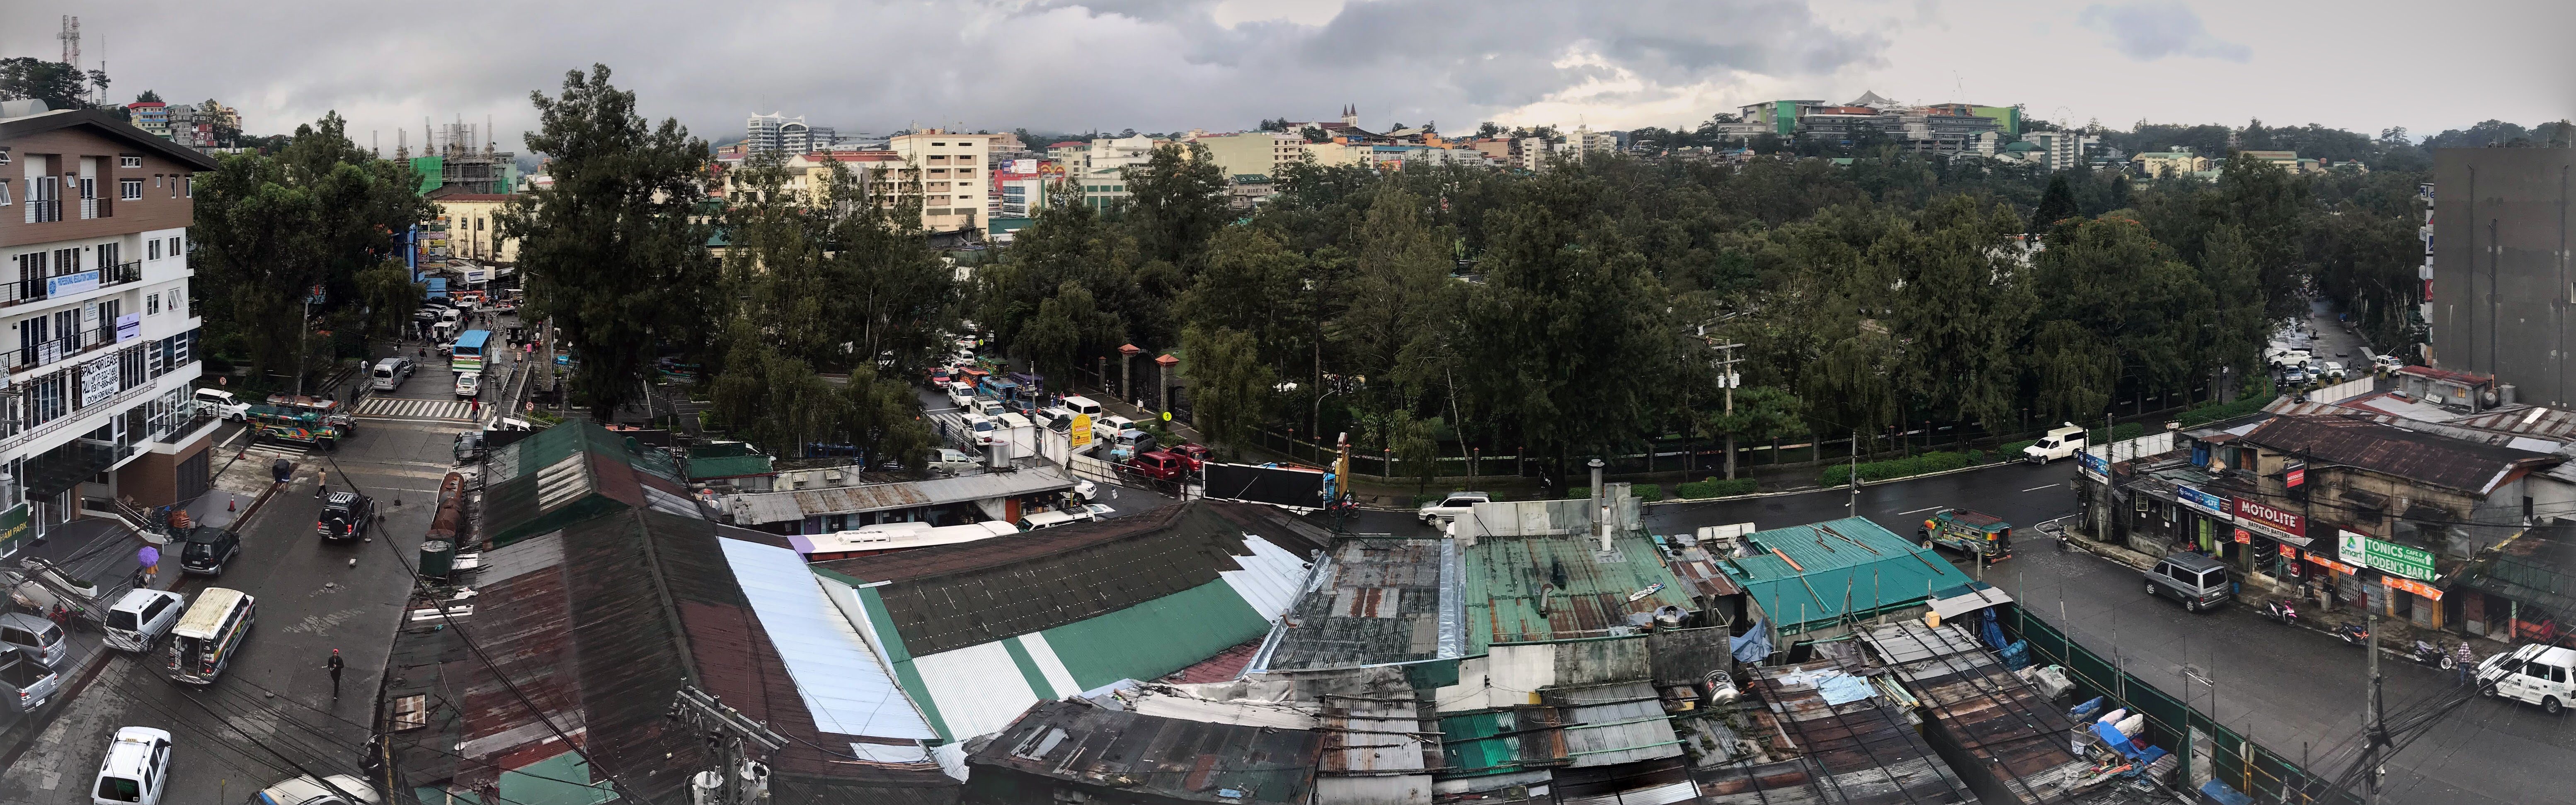 The rooftops of Baguio, Philippines 